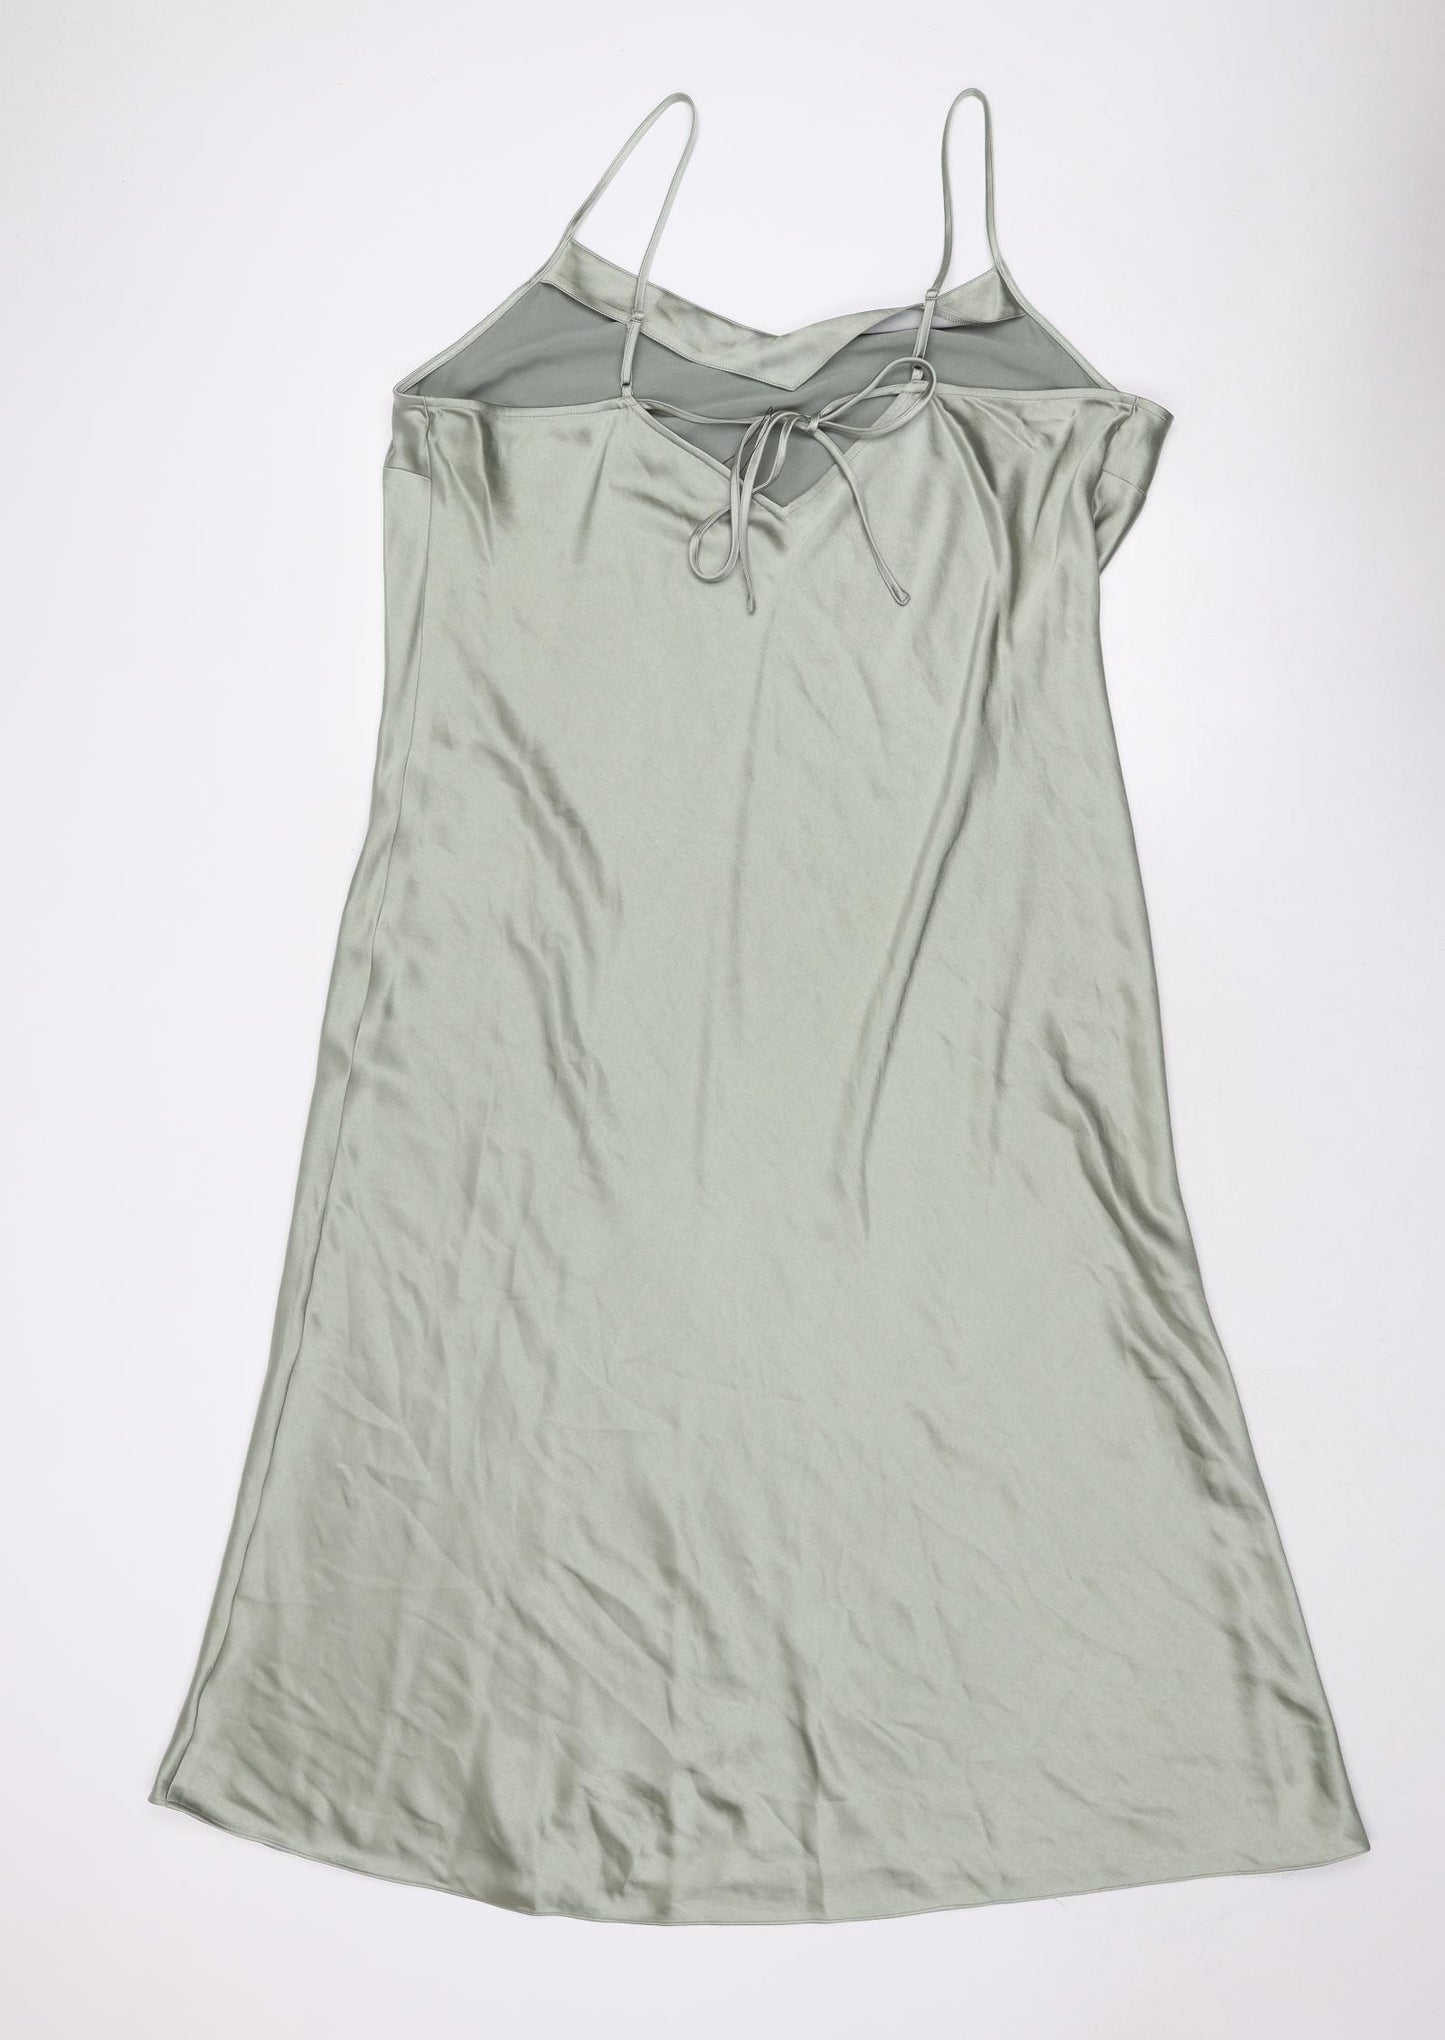 Marks and Spencer Womens Green Polyester Slip Dress Size 20 Scoop Neck Tie